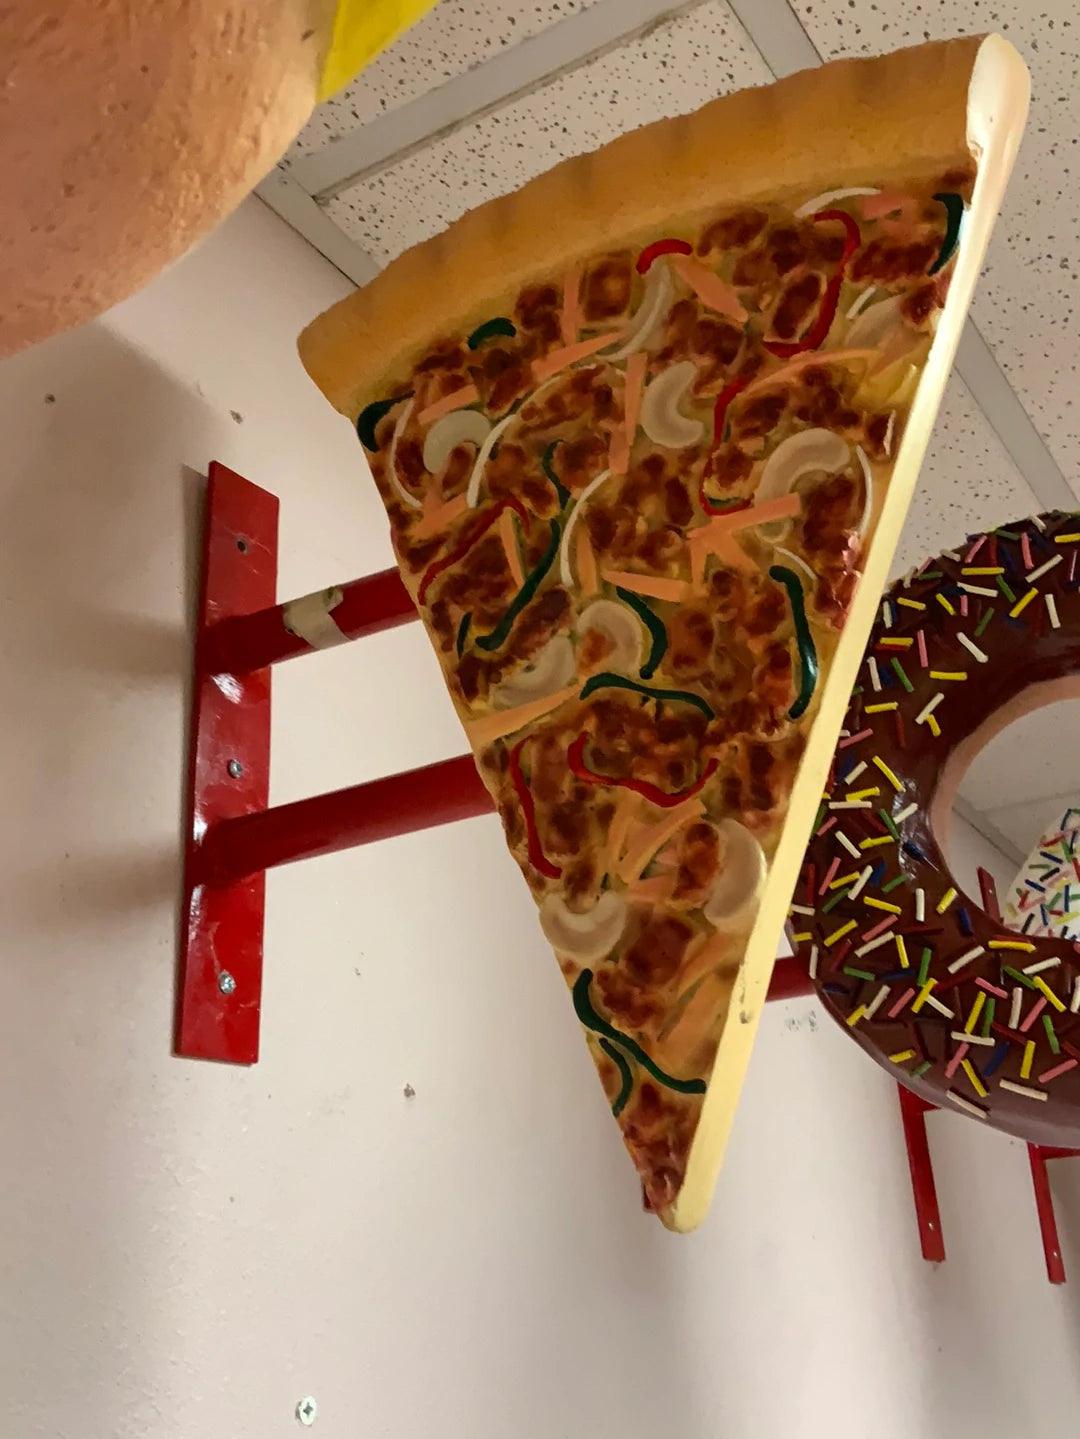 Hanging Pizza Statue